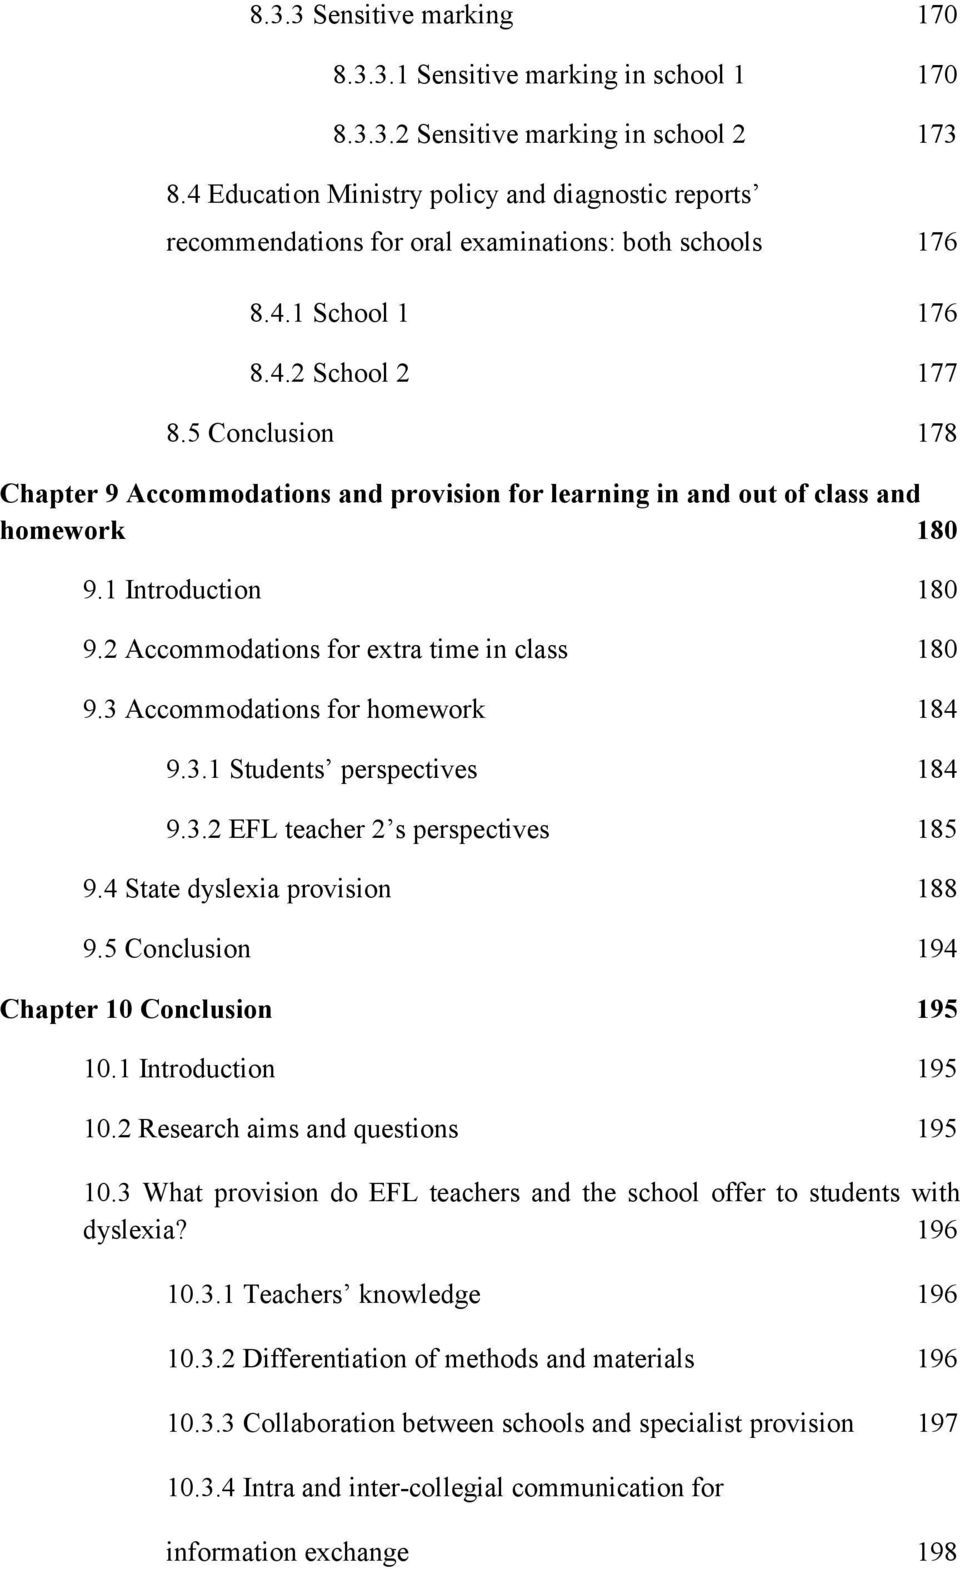 5 Conclusion 178 Chapter 9 Accommodations and provision for learning in and out of class and homework 180 9.1 Introduction 180 9.2 Accommodations for extra time in class 180 9.